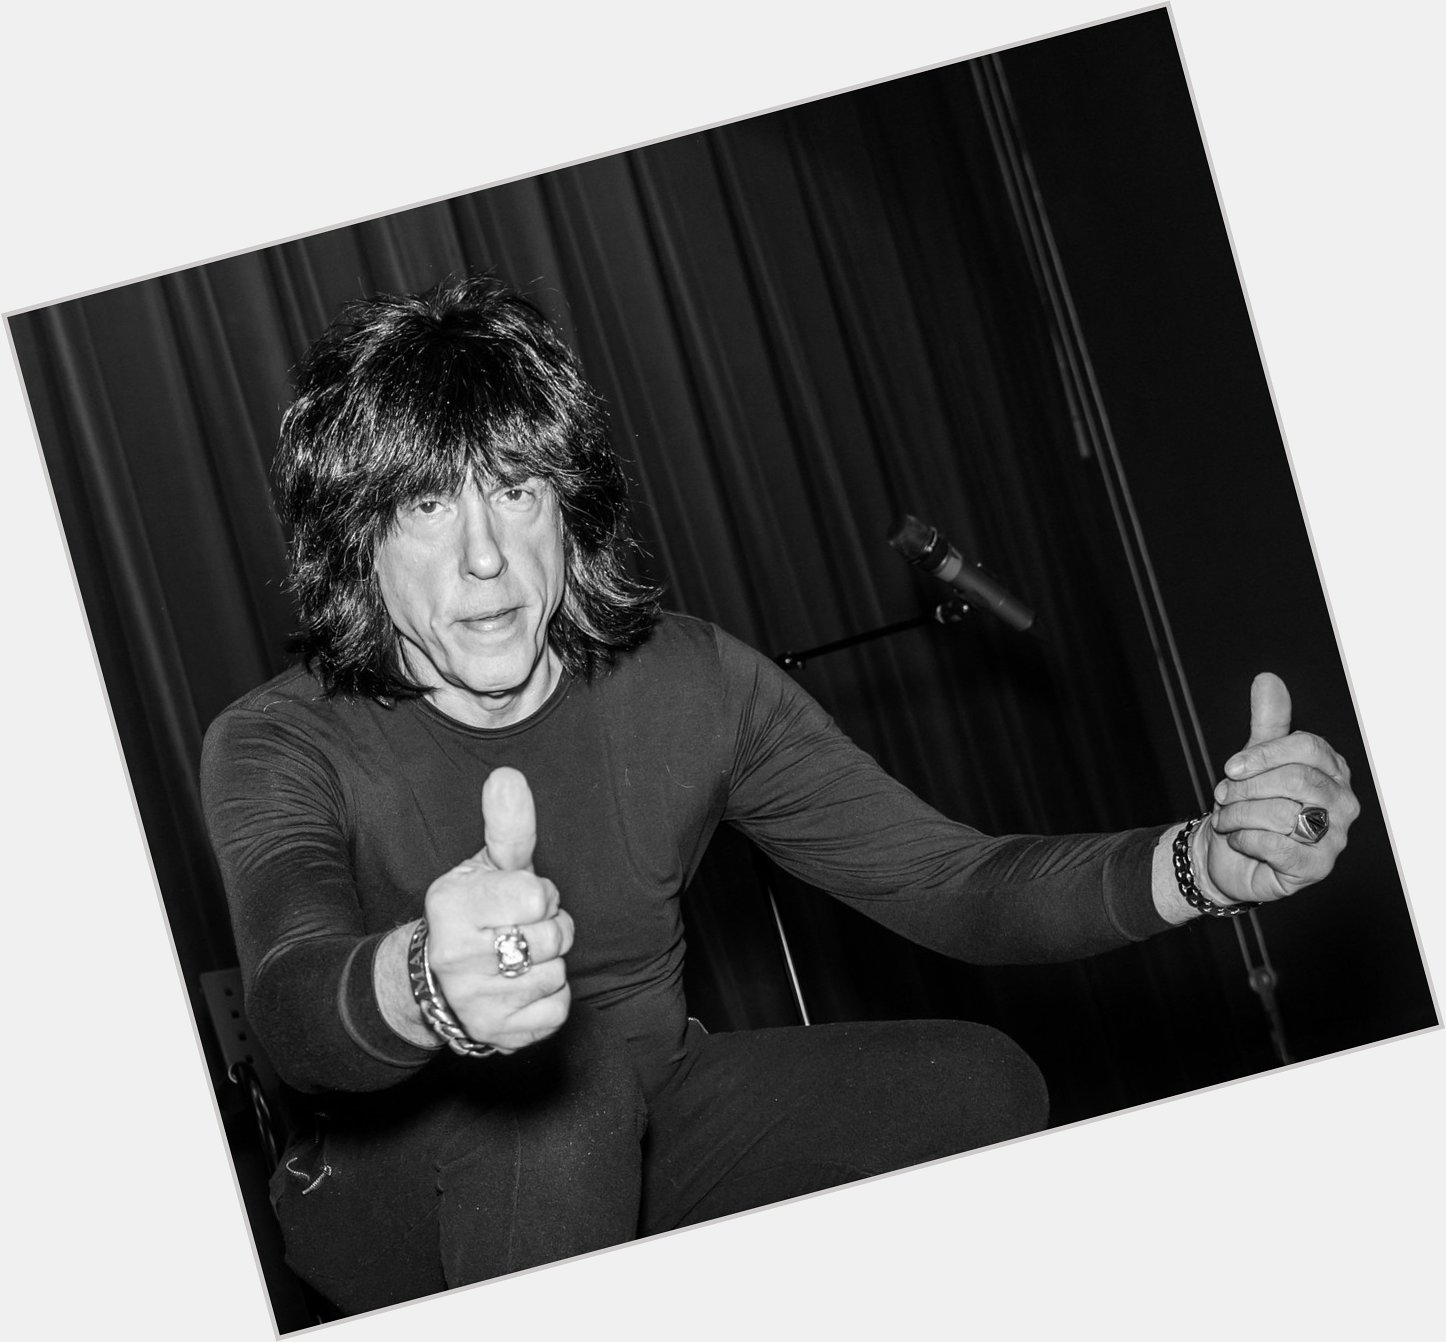 Rhino wishes Marky Ramone a happy birthday! His first album was ROAD TO RUIN.  